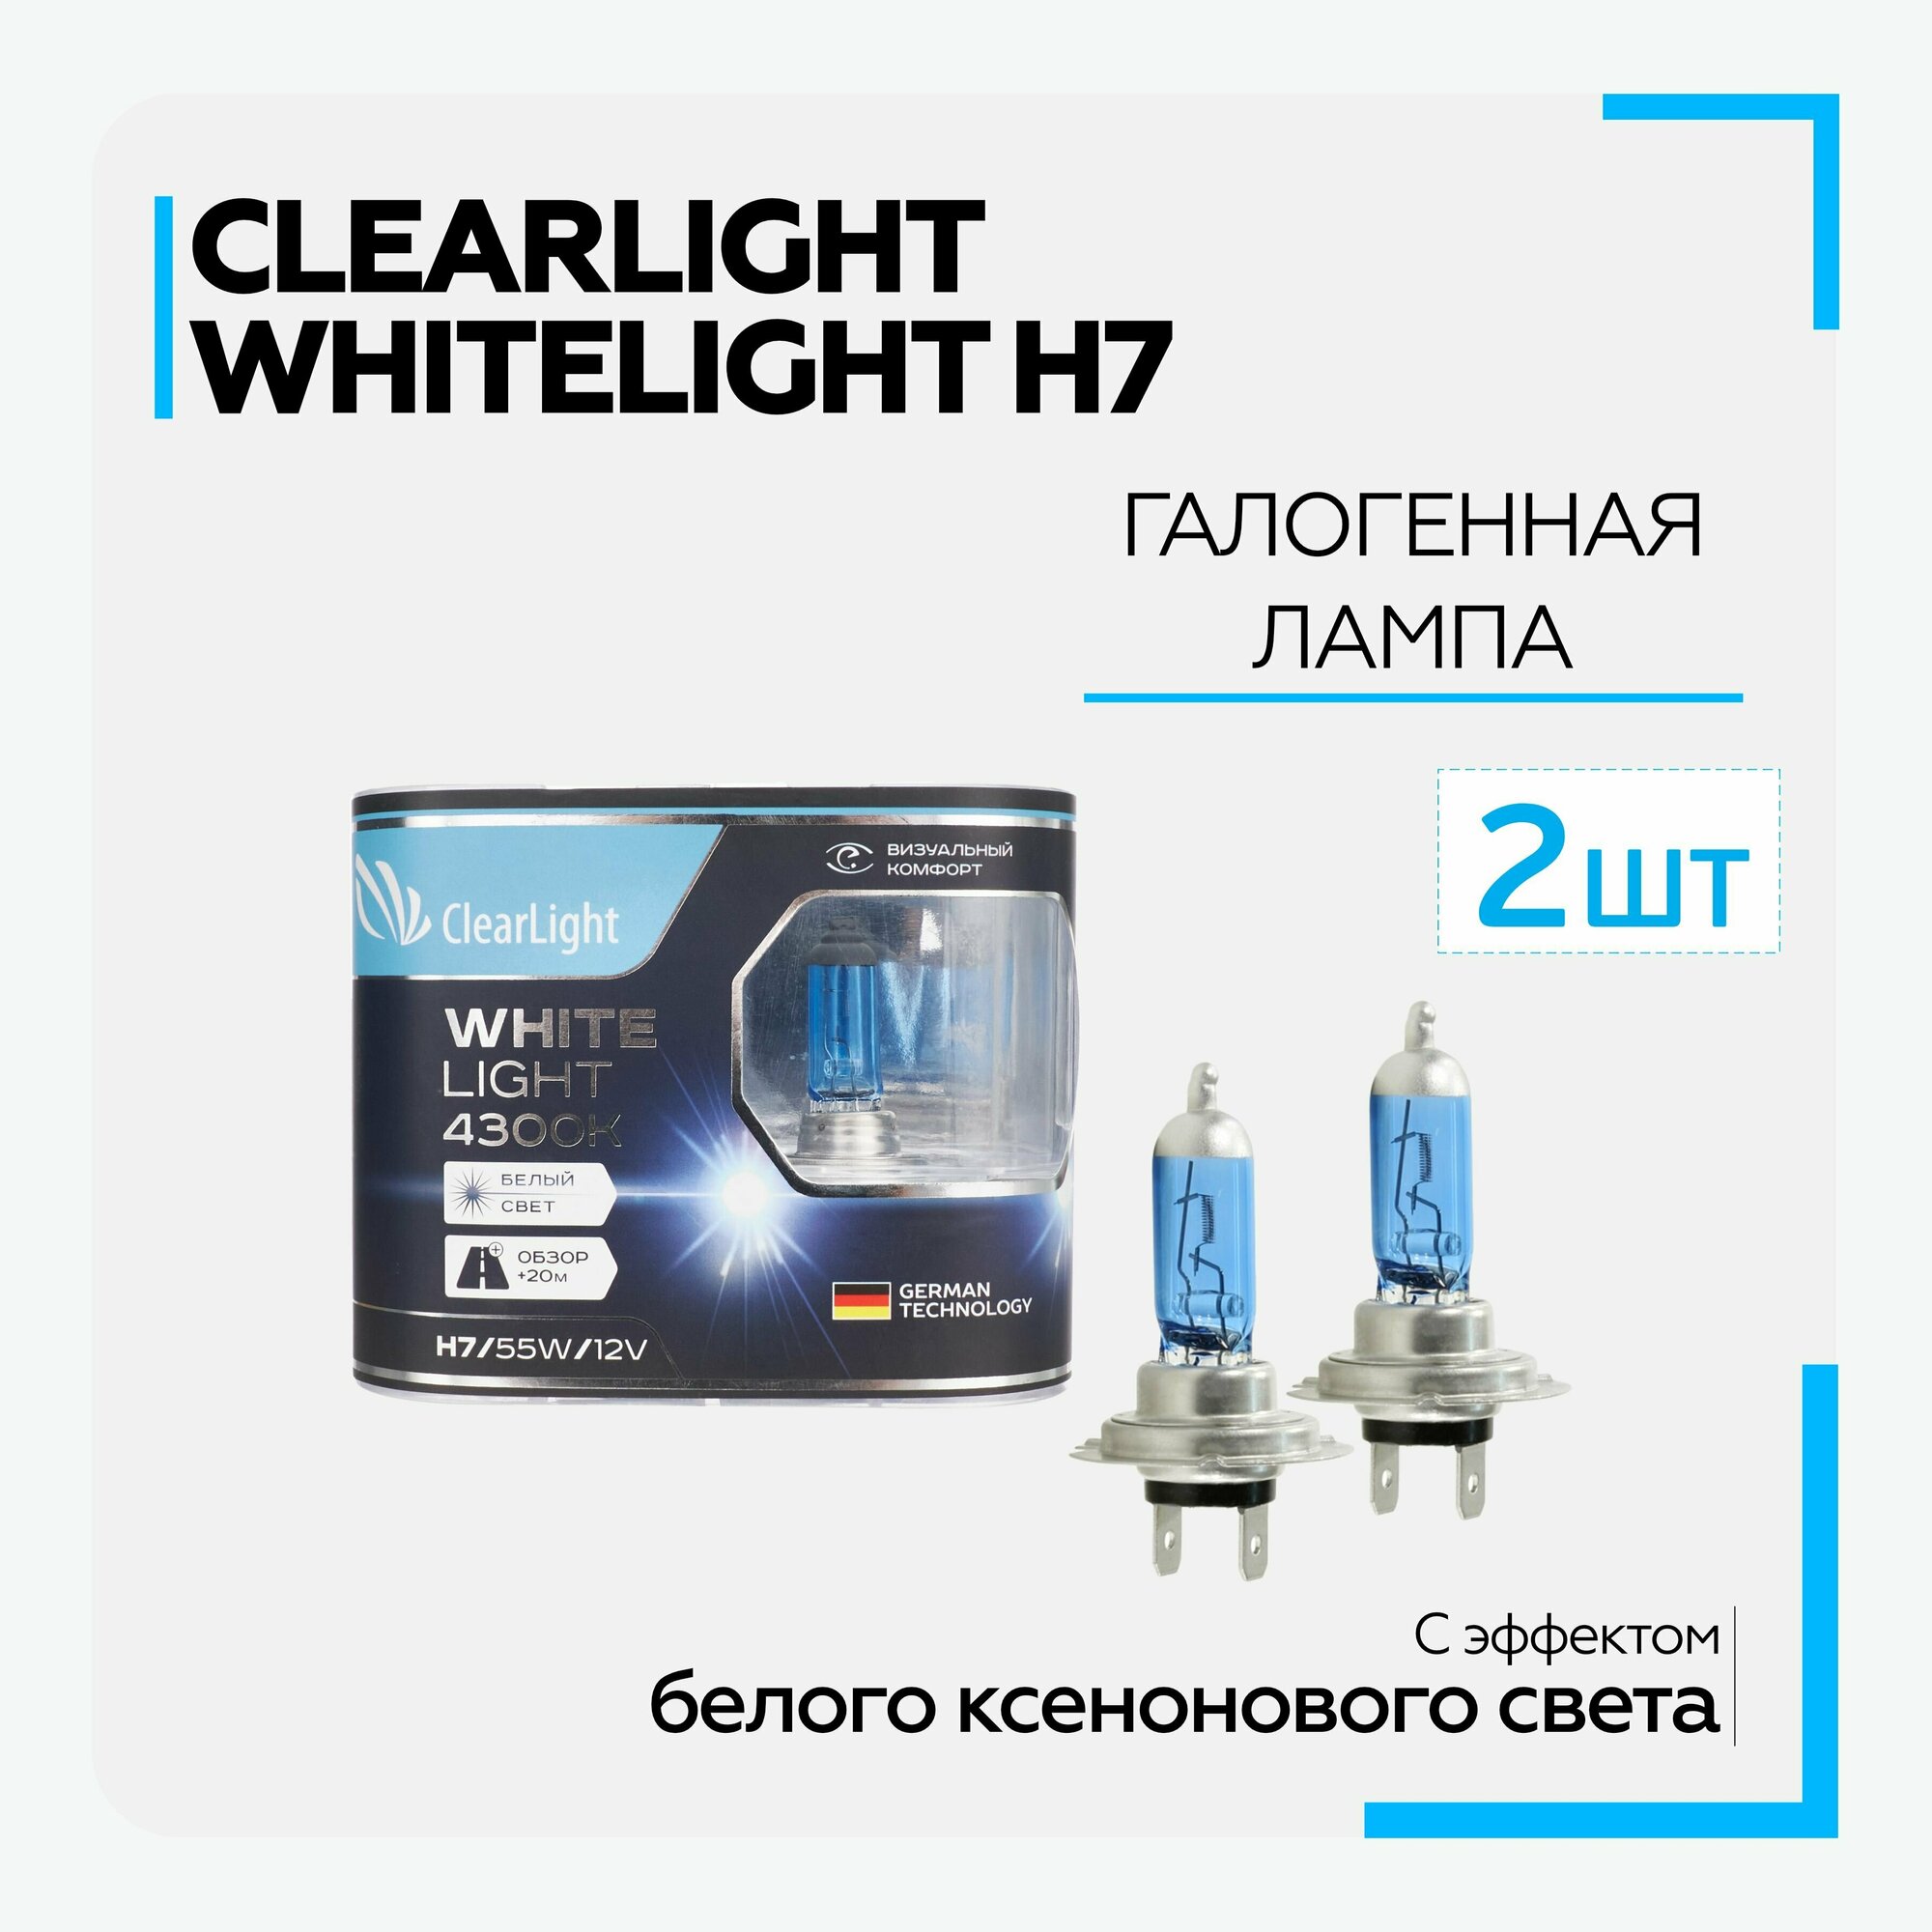 ClearLight Лампа H7 Clearlight 12V-55W WhiteLight 2 шт.